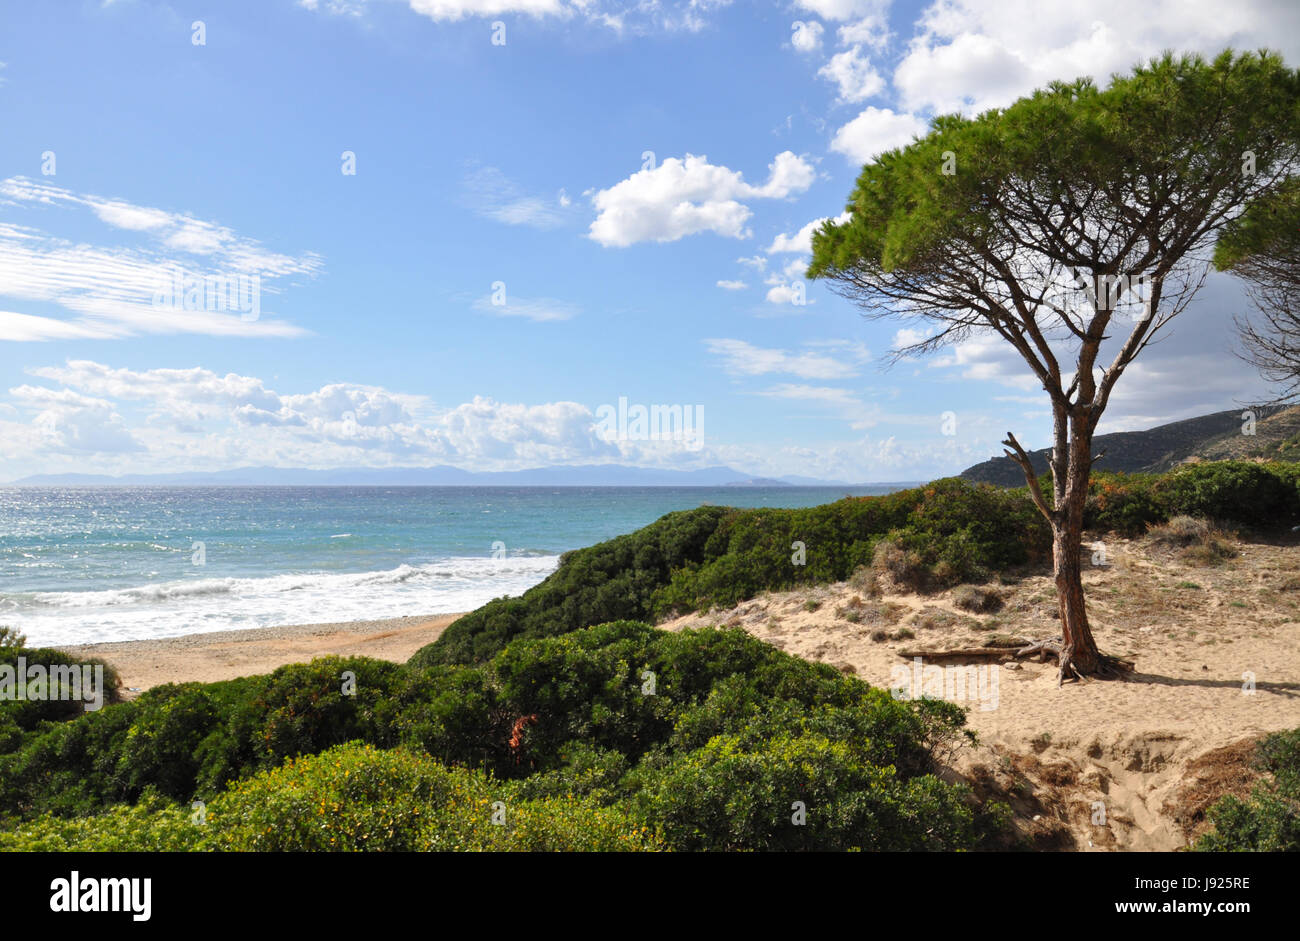 Beautiful Costa Rei beach view with pine trees and grenn bushes and cliffs on Sardinia island in Italy Stock Photo